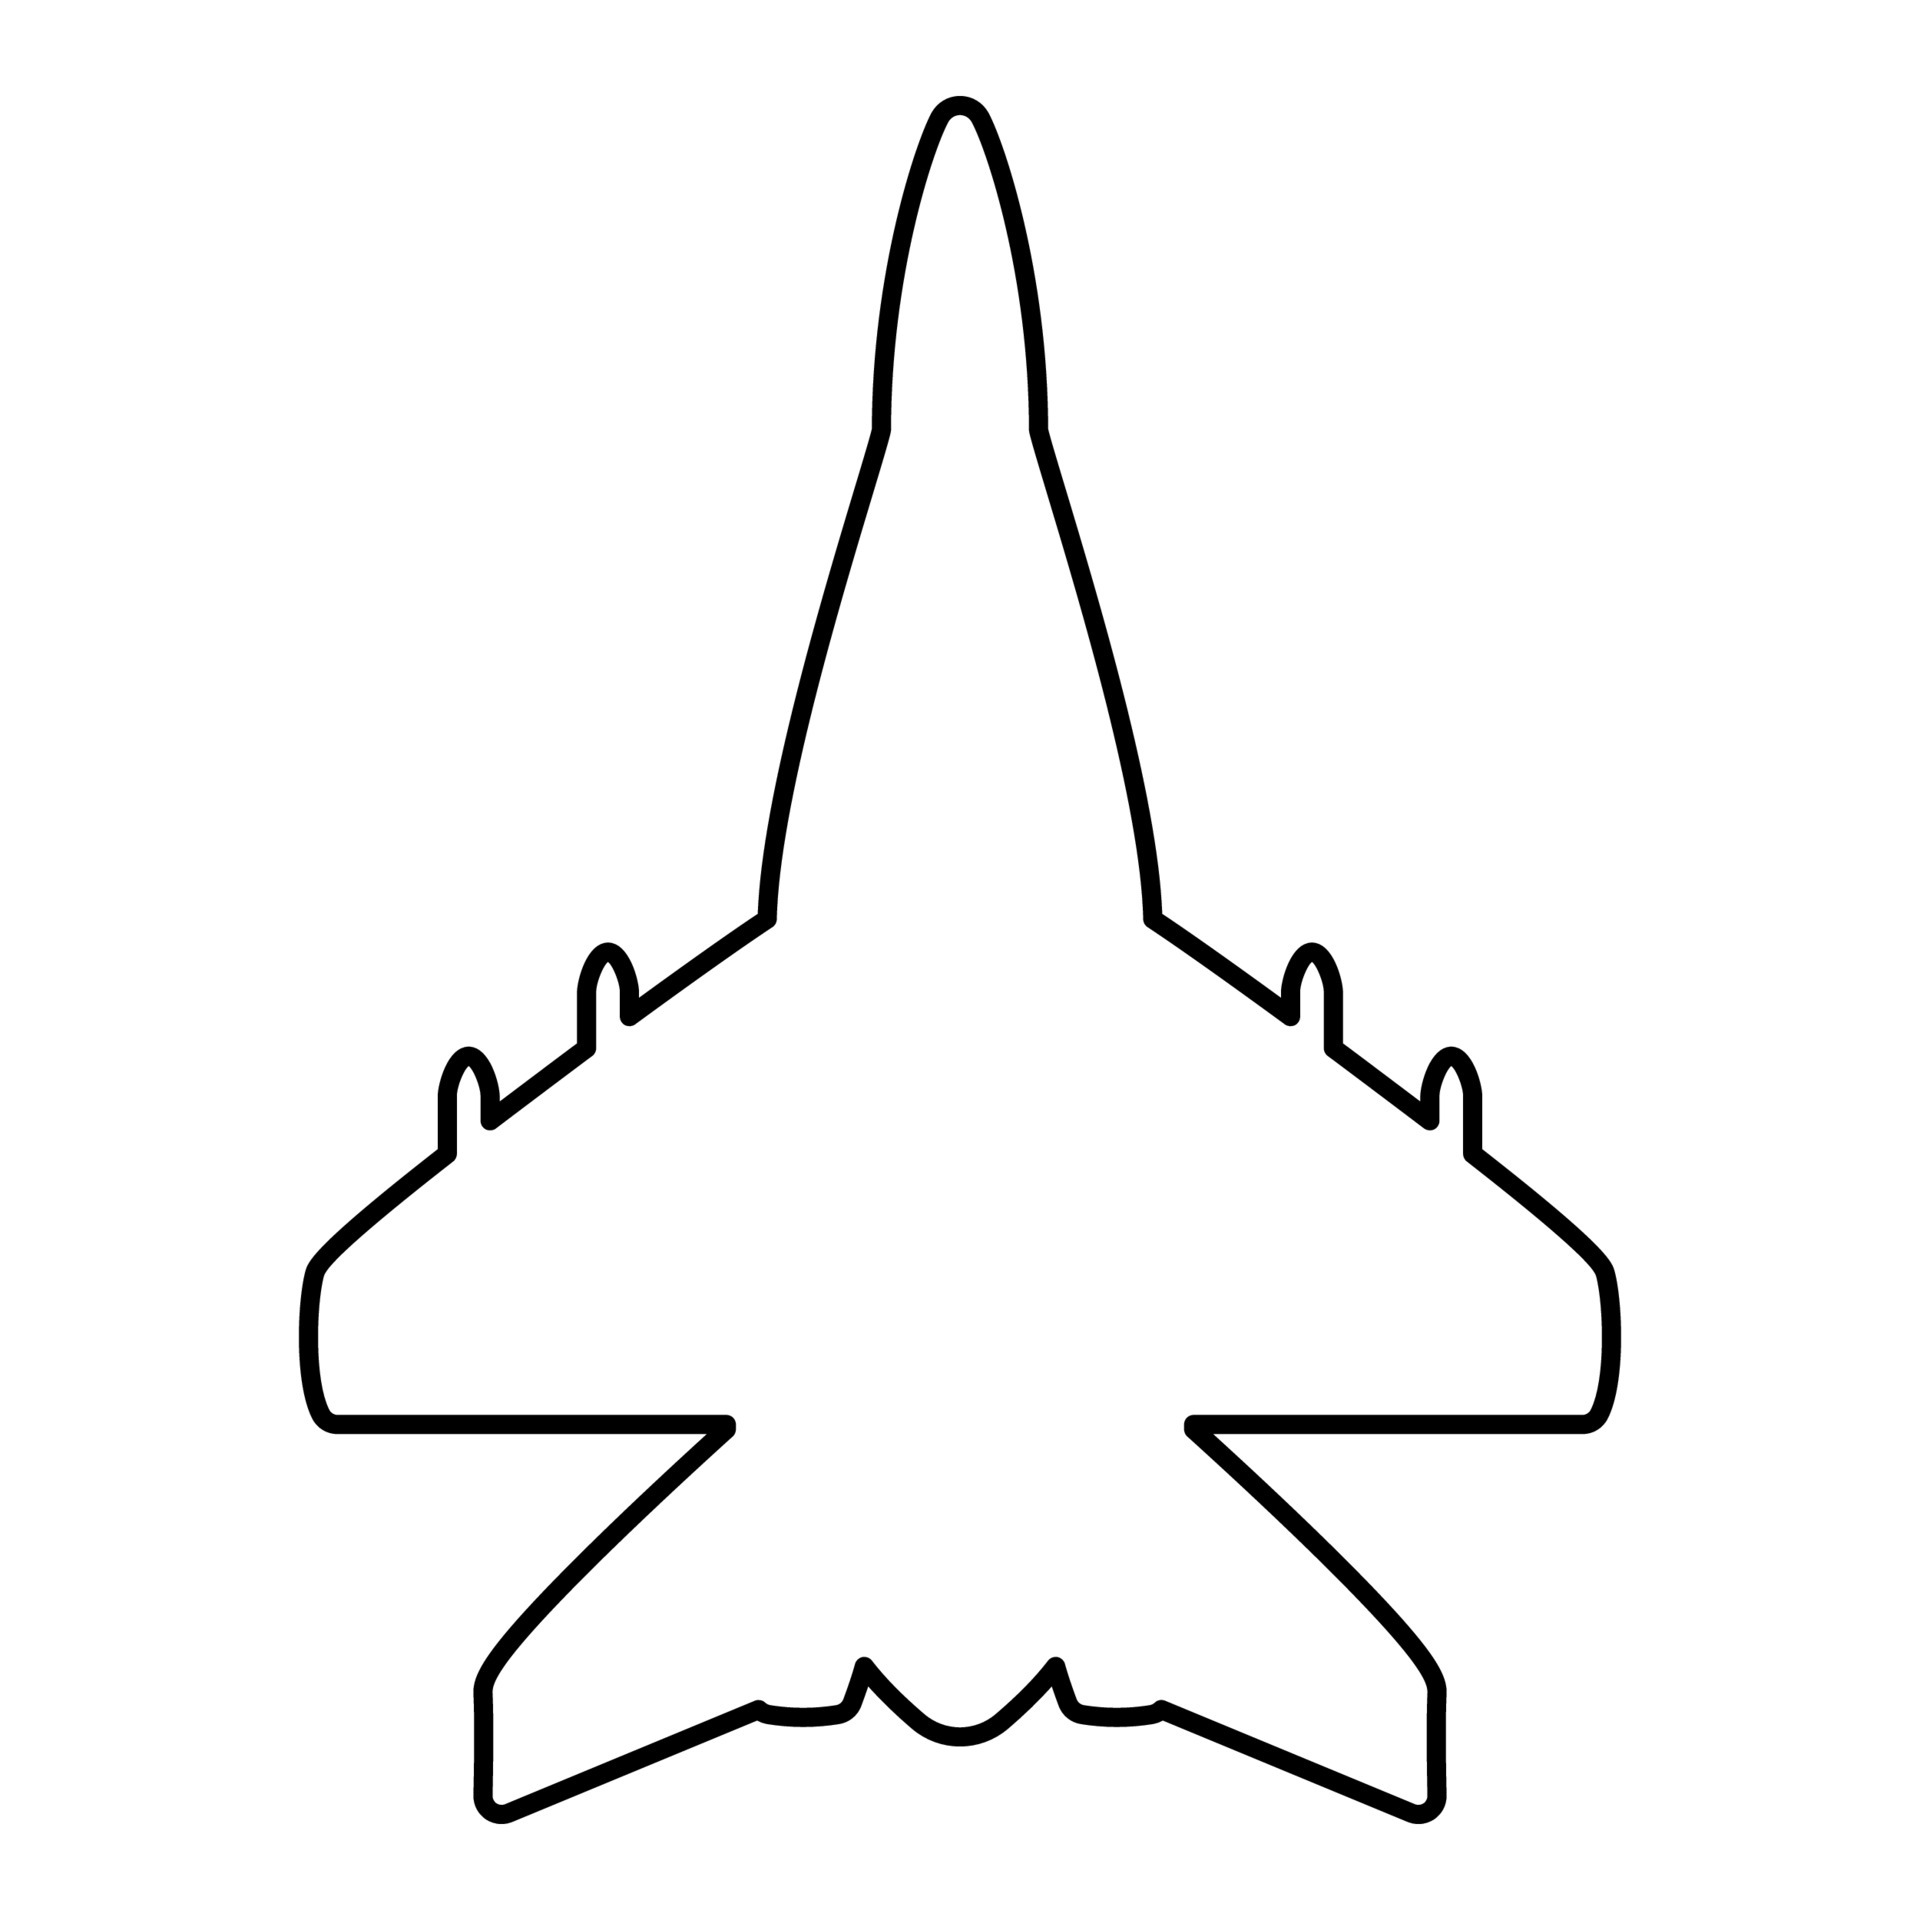 How to draw a fighter jet | Step by step Drawing tutorials